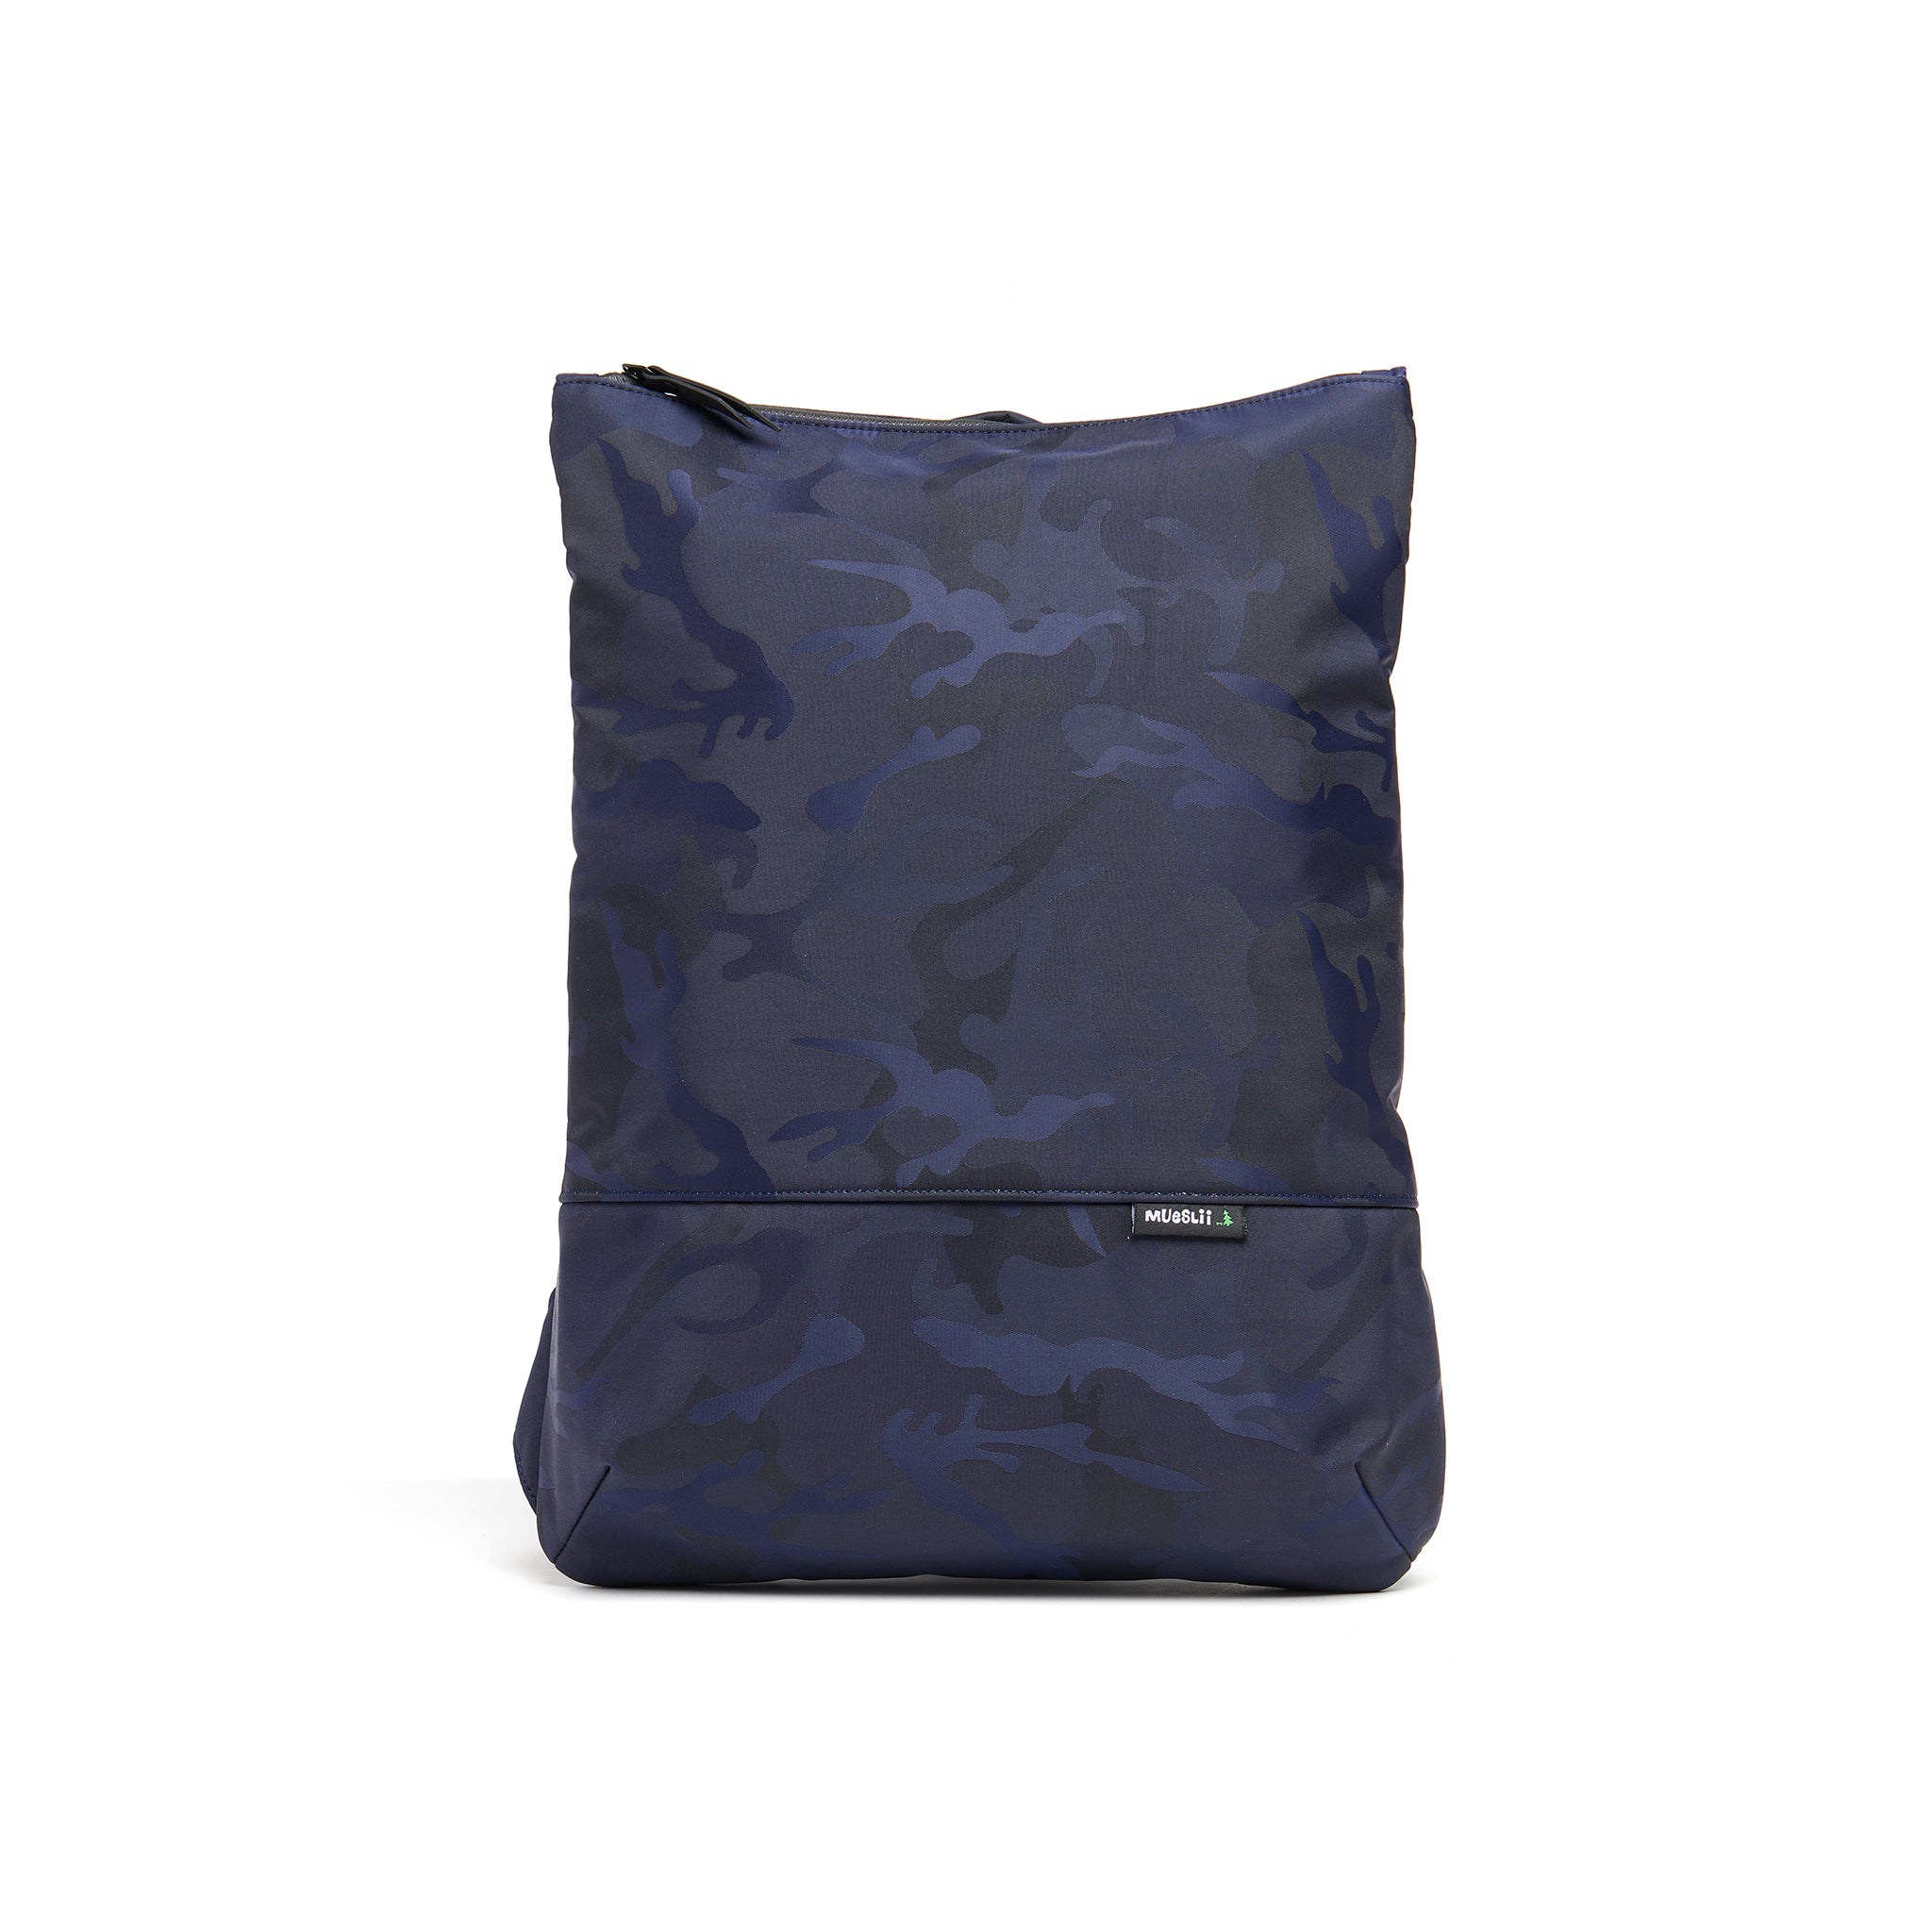 Mueslii light backpack, made of jacquard  waterproof nylon, with a laptop compartment, pattern camouflage, color blue, front view.